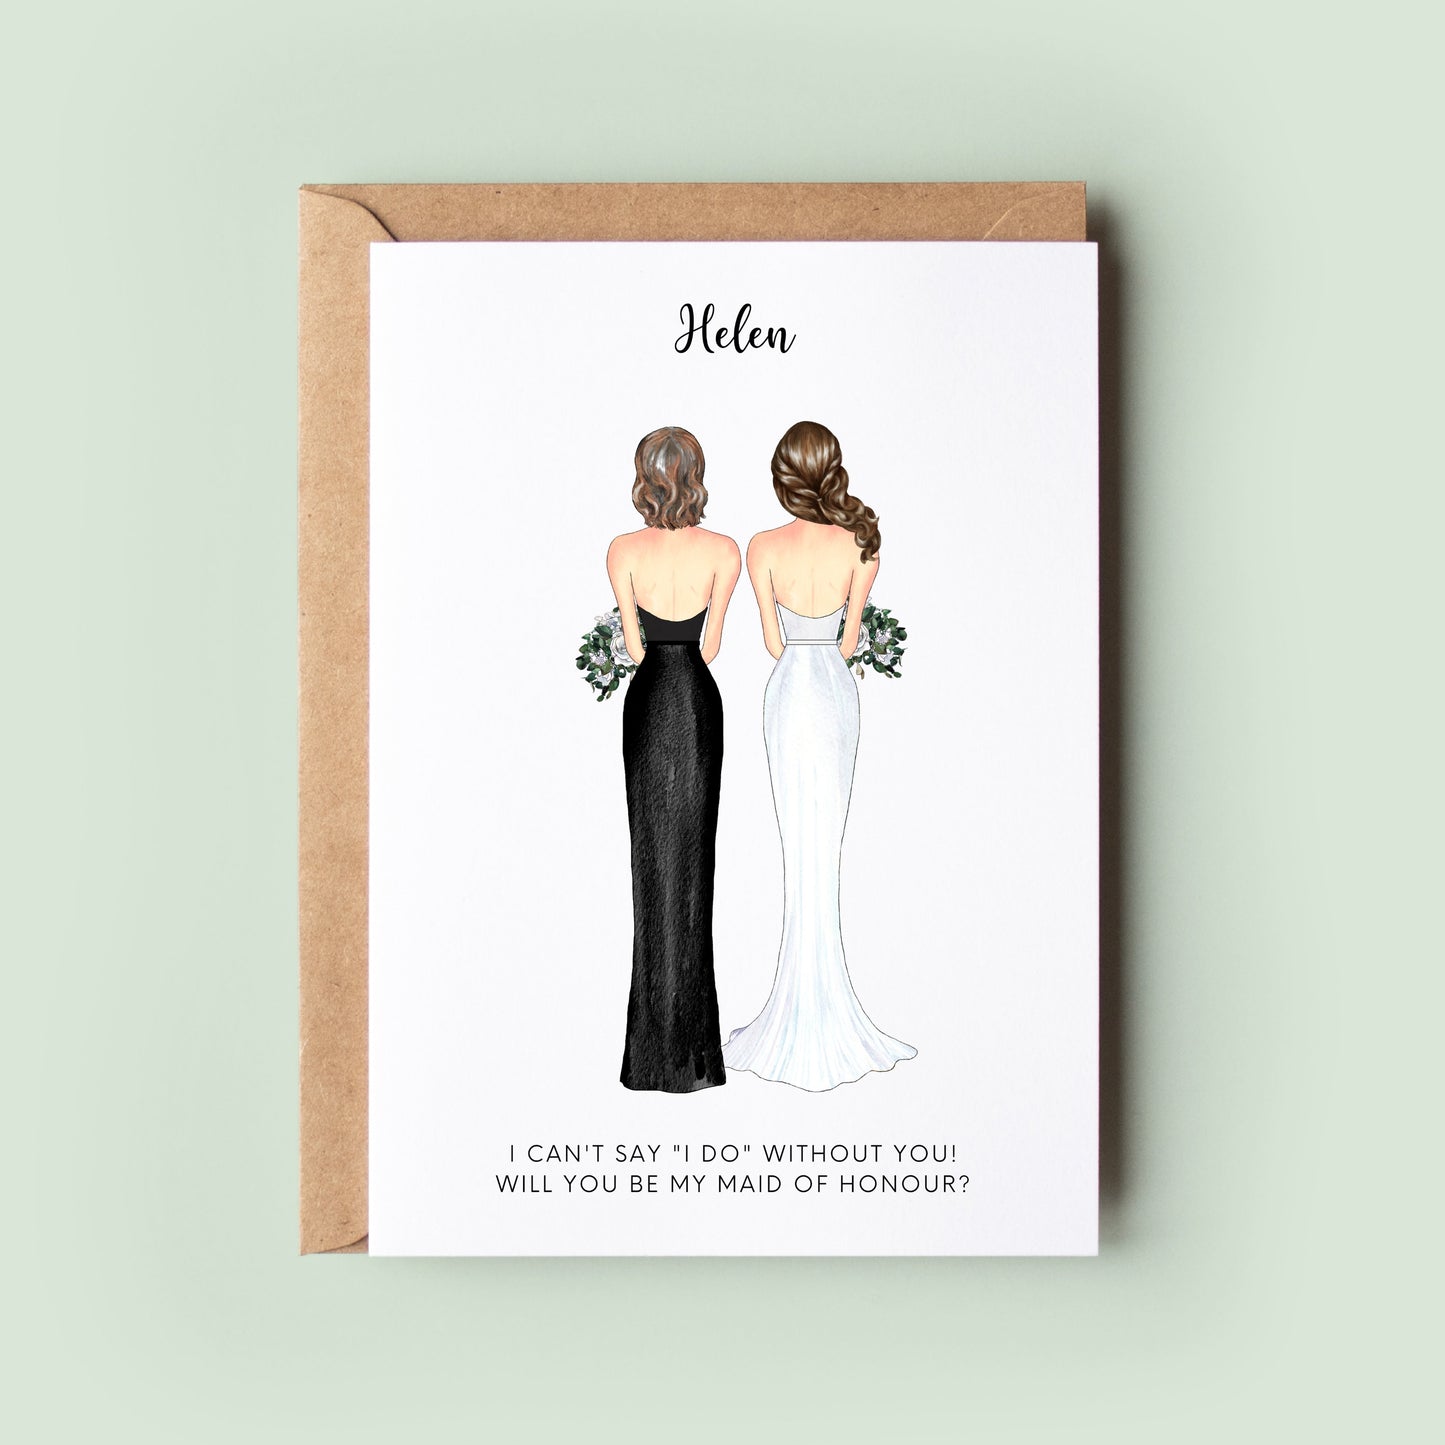 A beautiful Maid of Honour Proposal Card by Ink and Fred, featuring personalised illustrations and text, a perfect way to ask your best friend to be your maid or matron of honor.